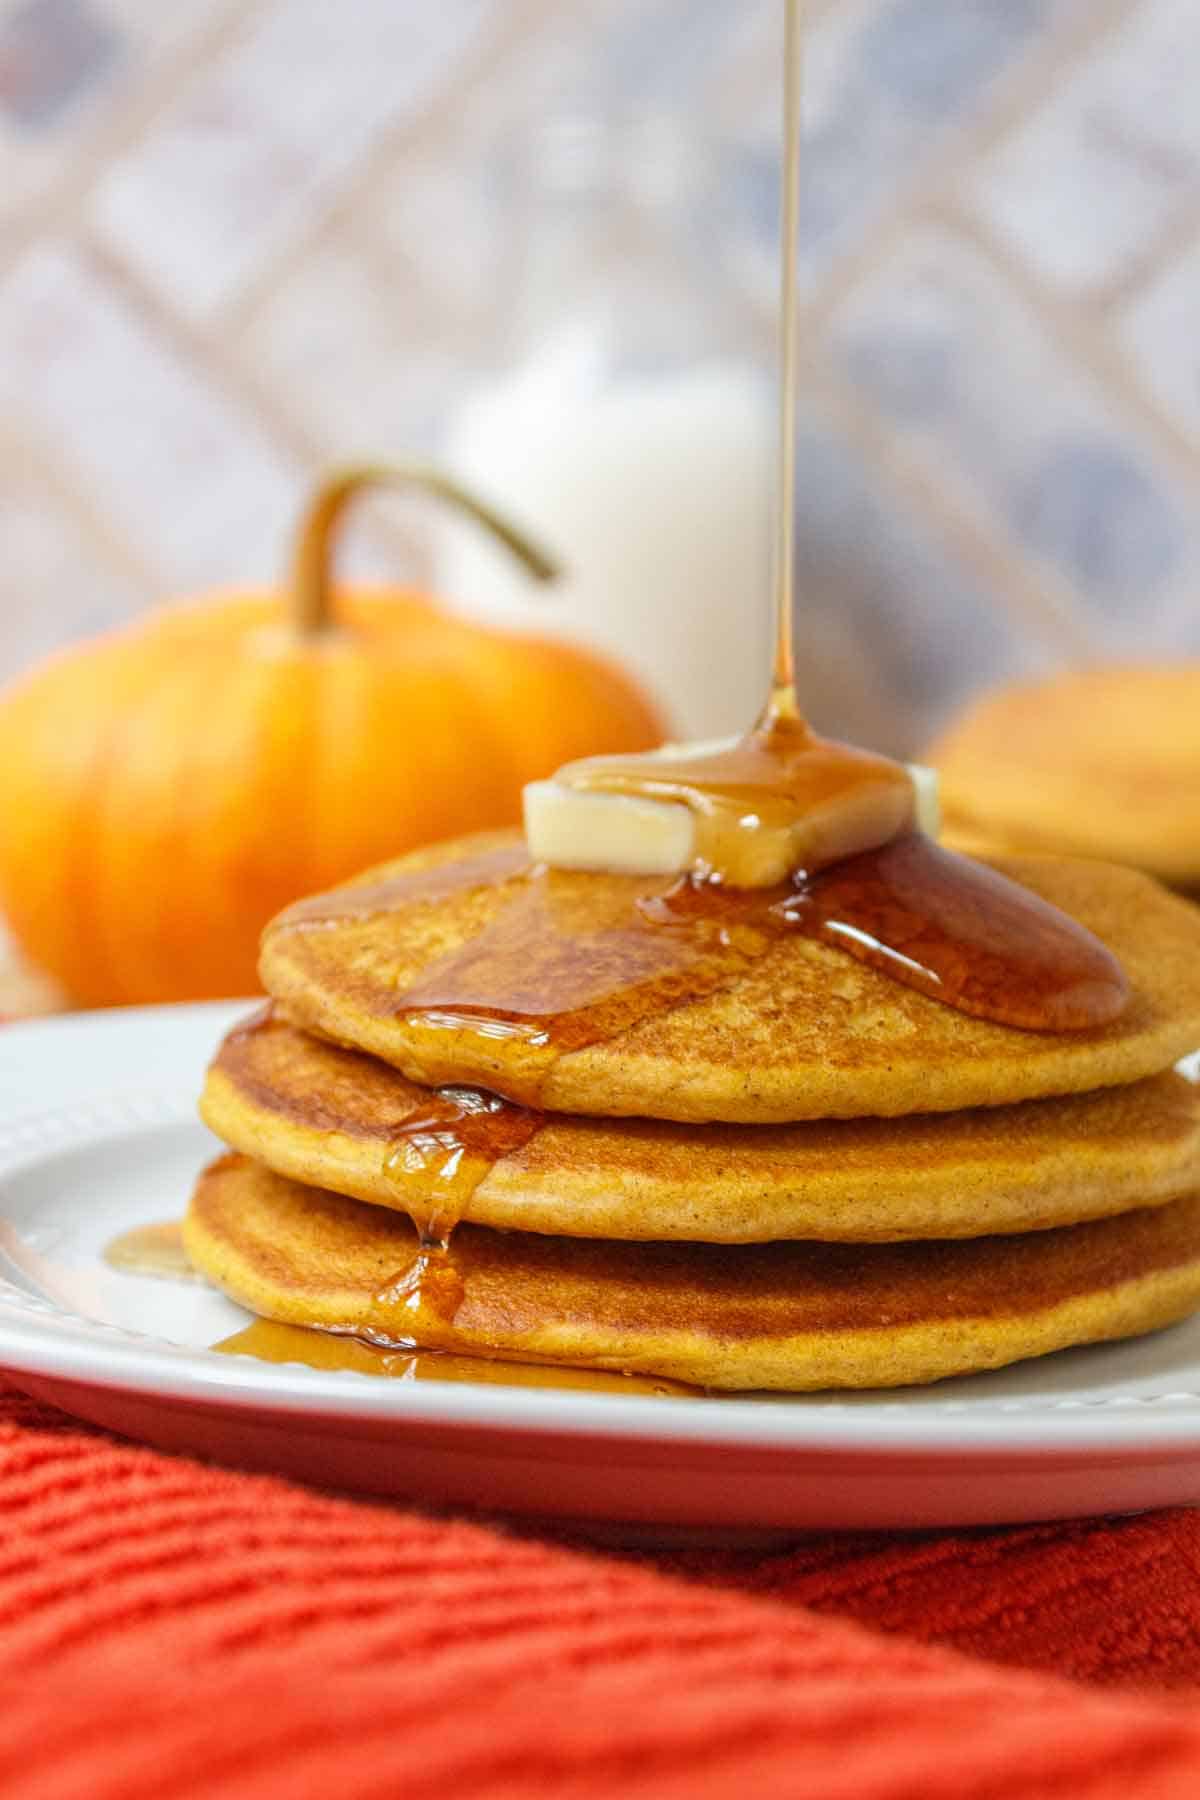 Maple syrup poured over Bisquick pumpkin pancakes.